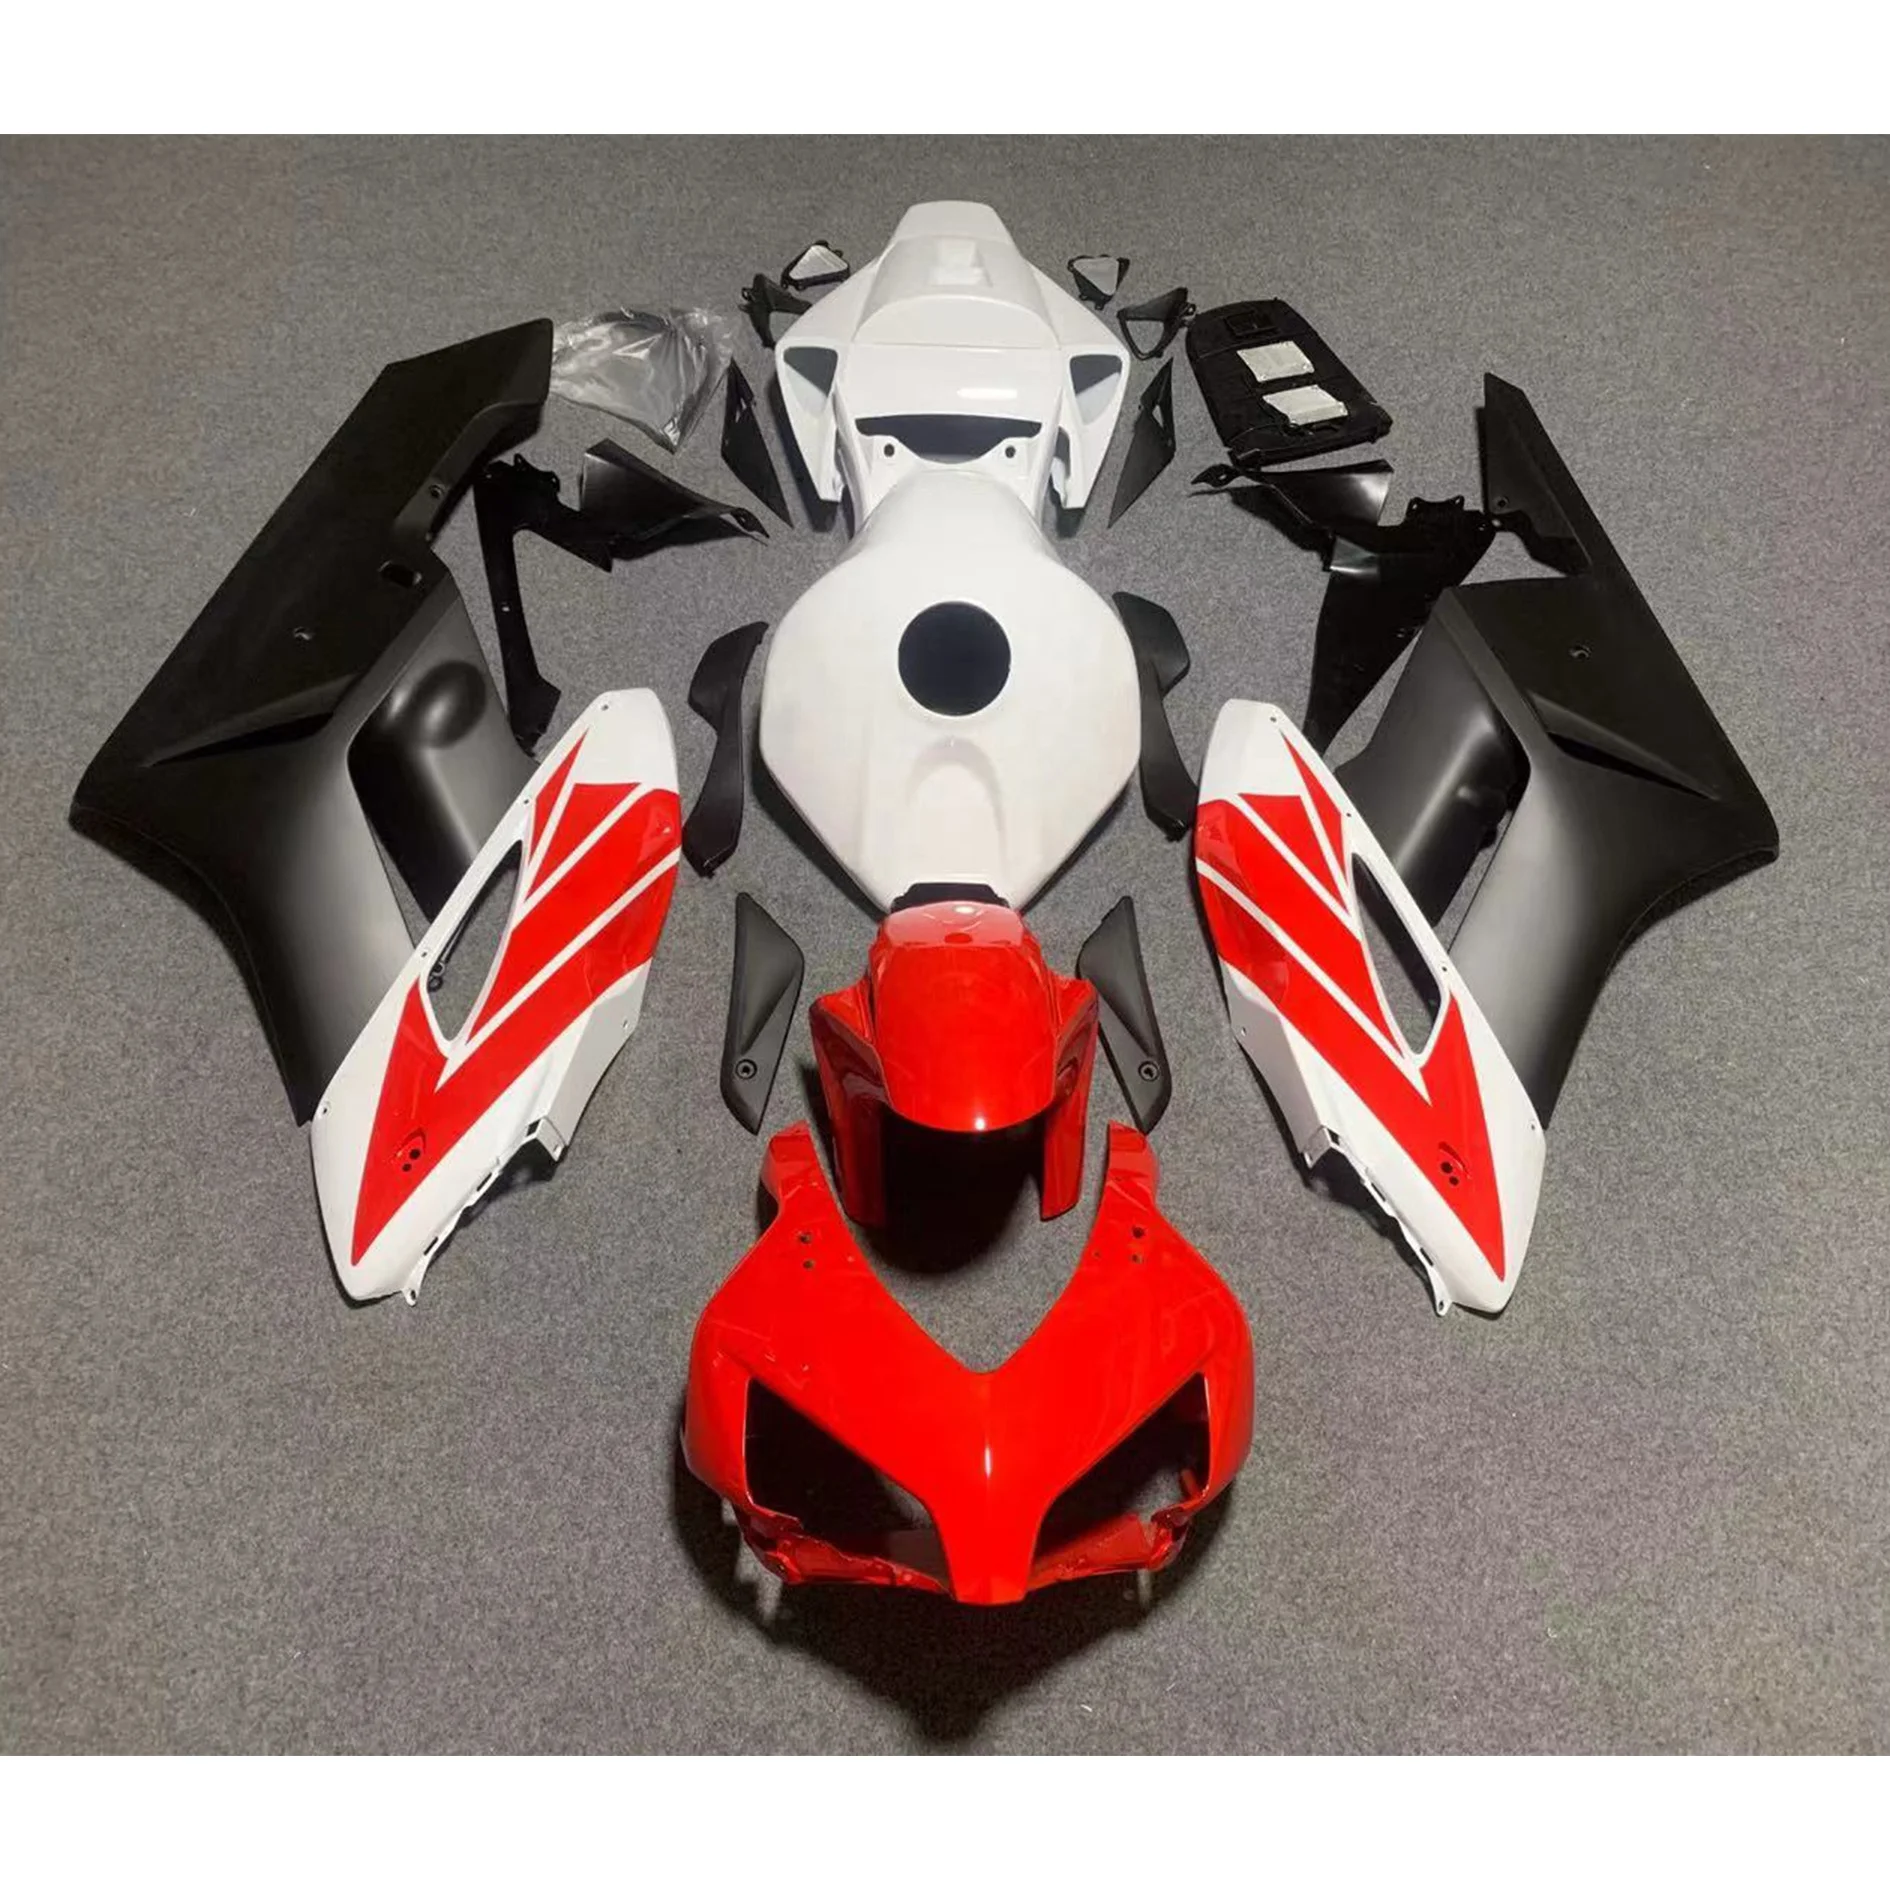 

2022 WHSC Red And White OEM Motorcycle Accessories For HONDA CBR1000 RR 2004-2005 04 05 Motorcycle Body Systems Fairing Kits, Pictures shown